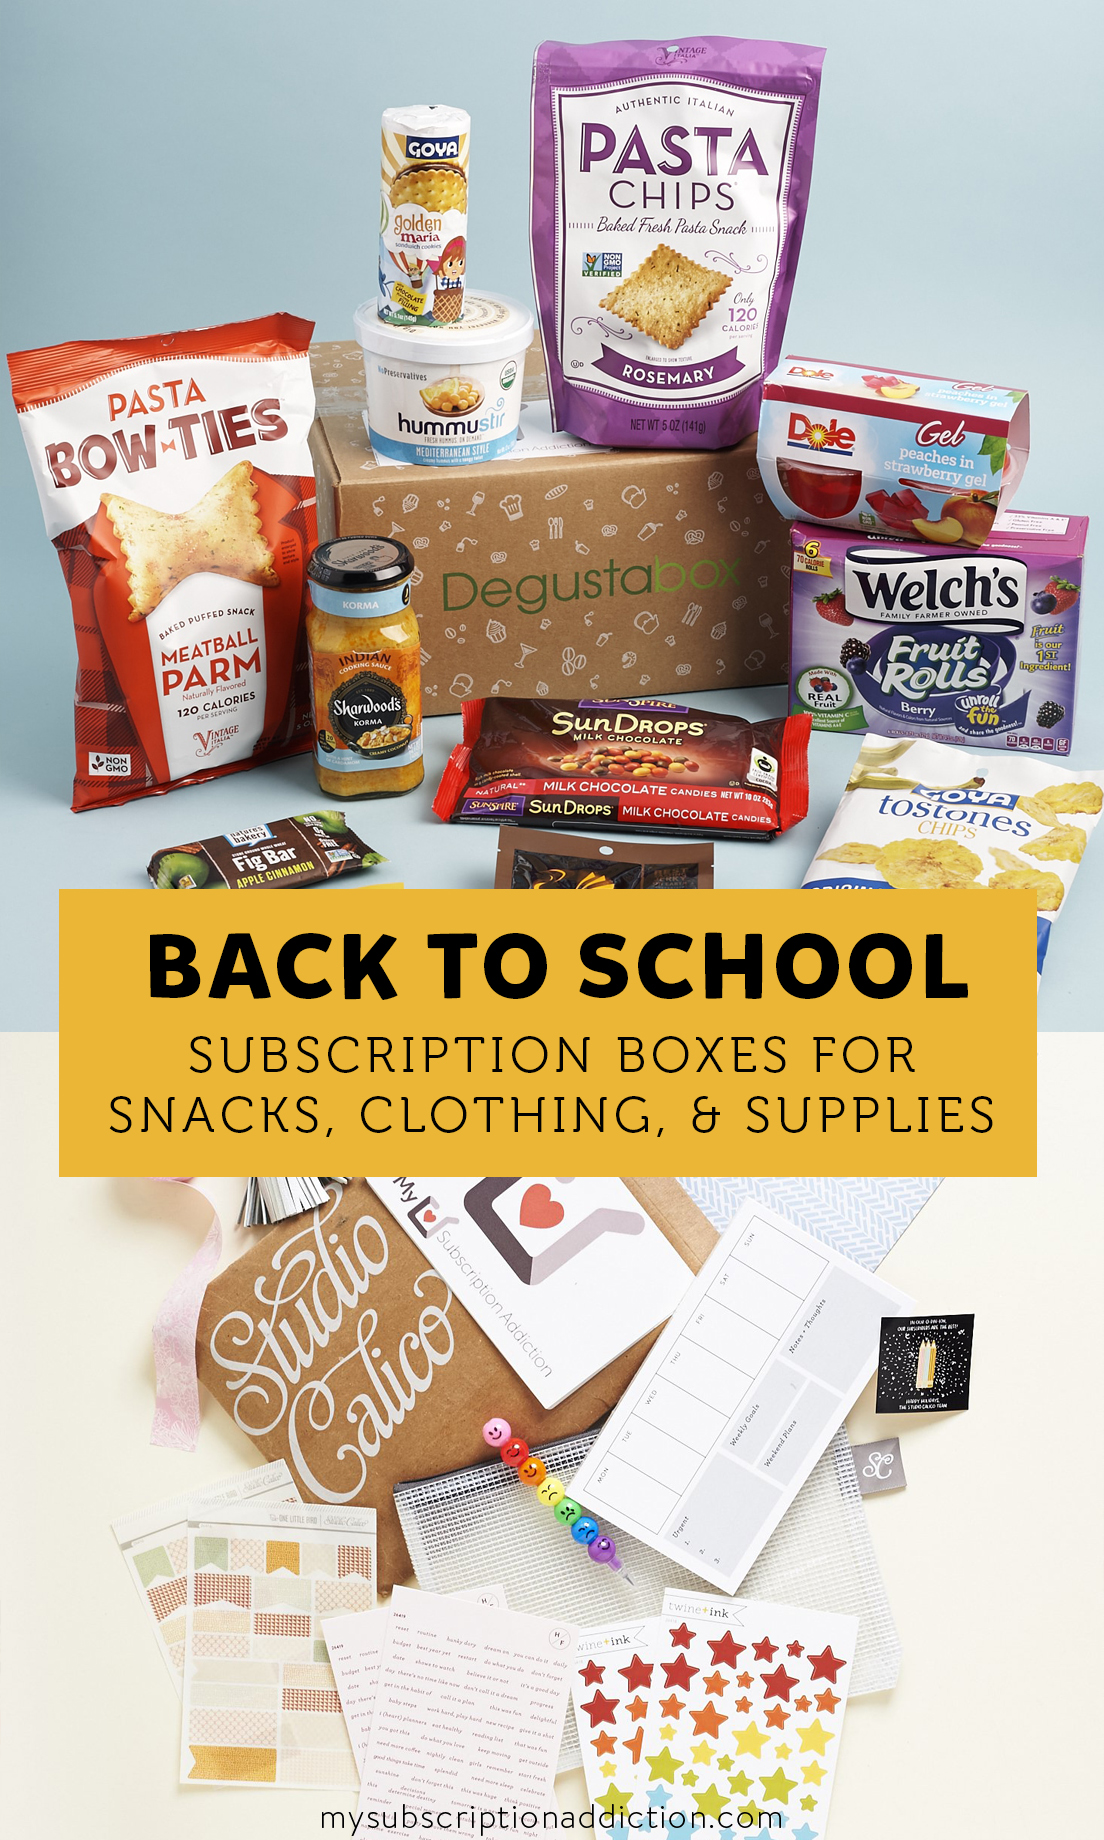 Back to School Subscription Boxes: 22 Ideas for Students of All Ages